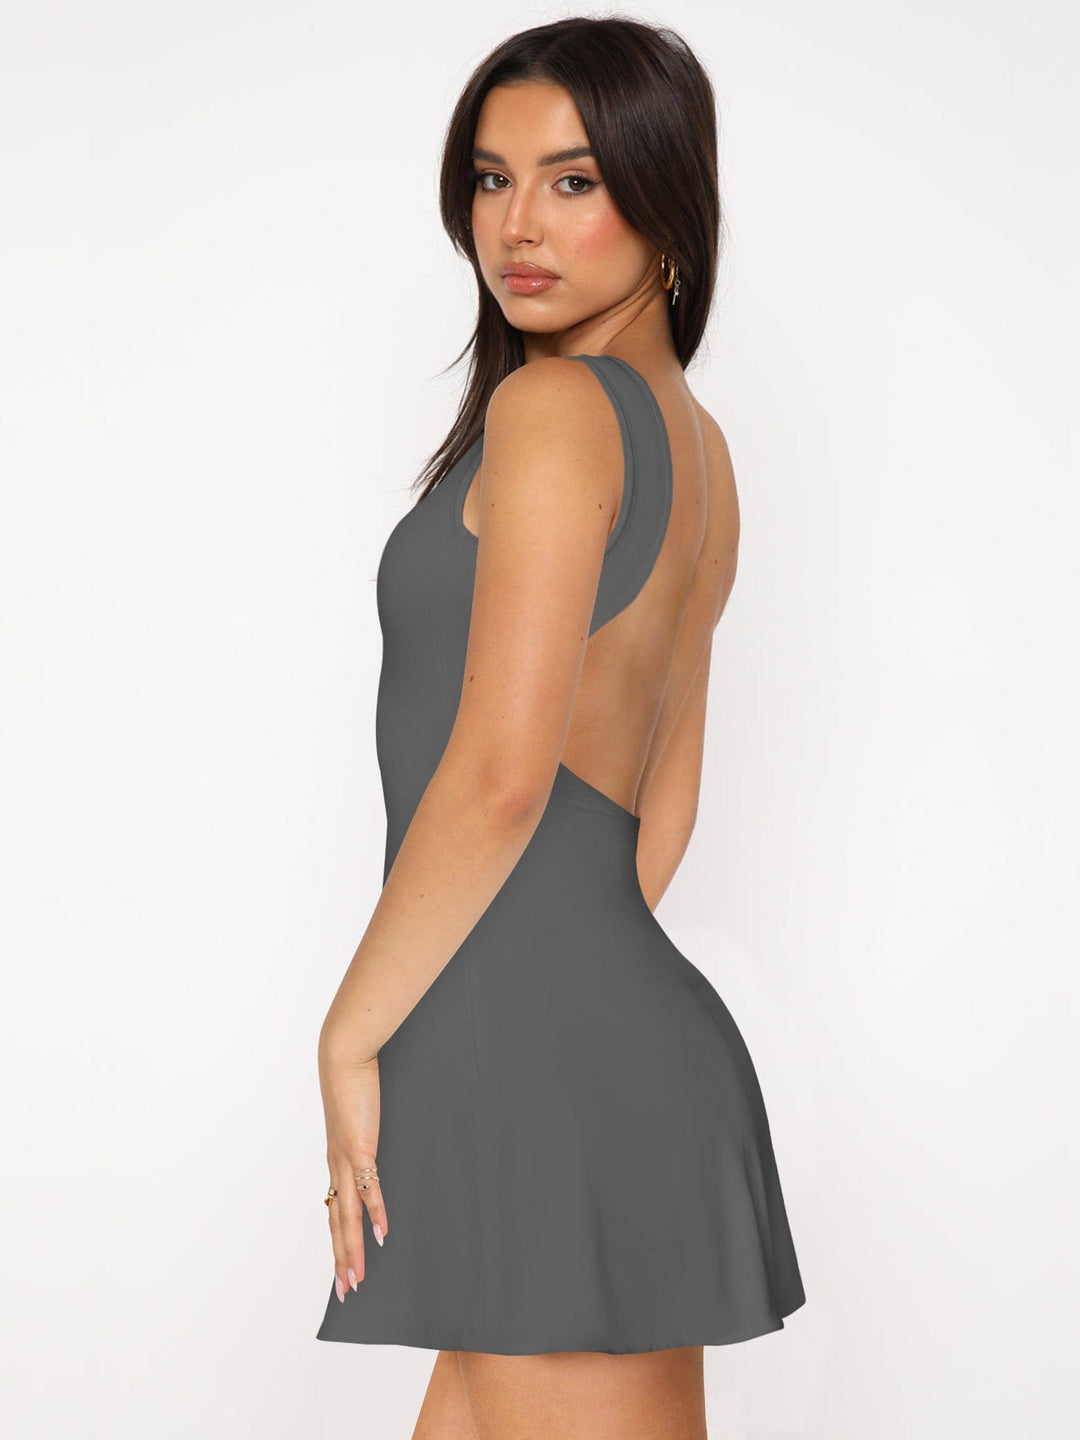 The802Gypsy clothing/dresses GYPSY-Backless Wide Strap Mini Dress